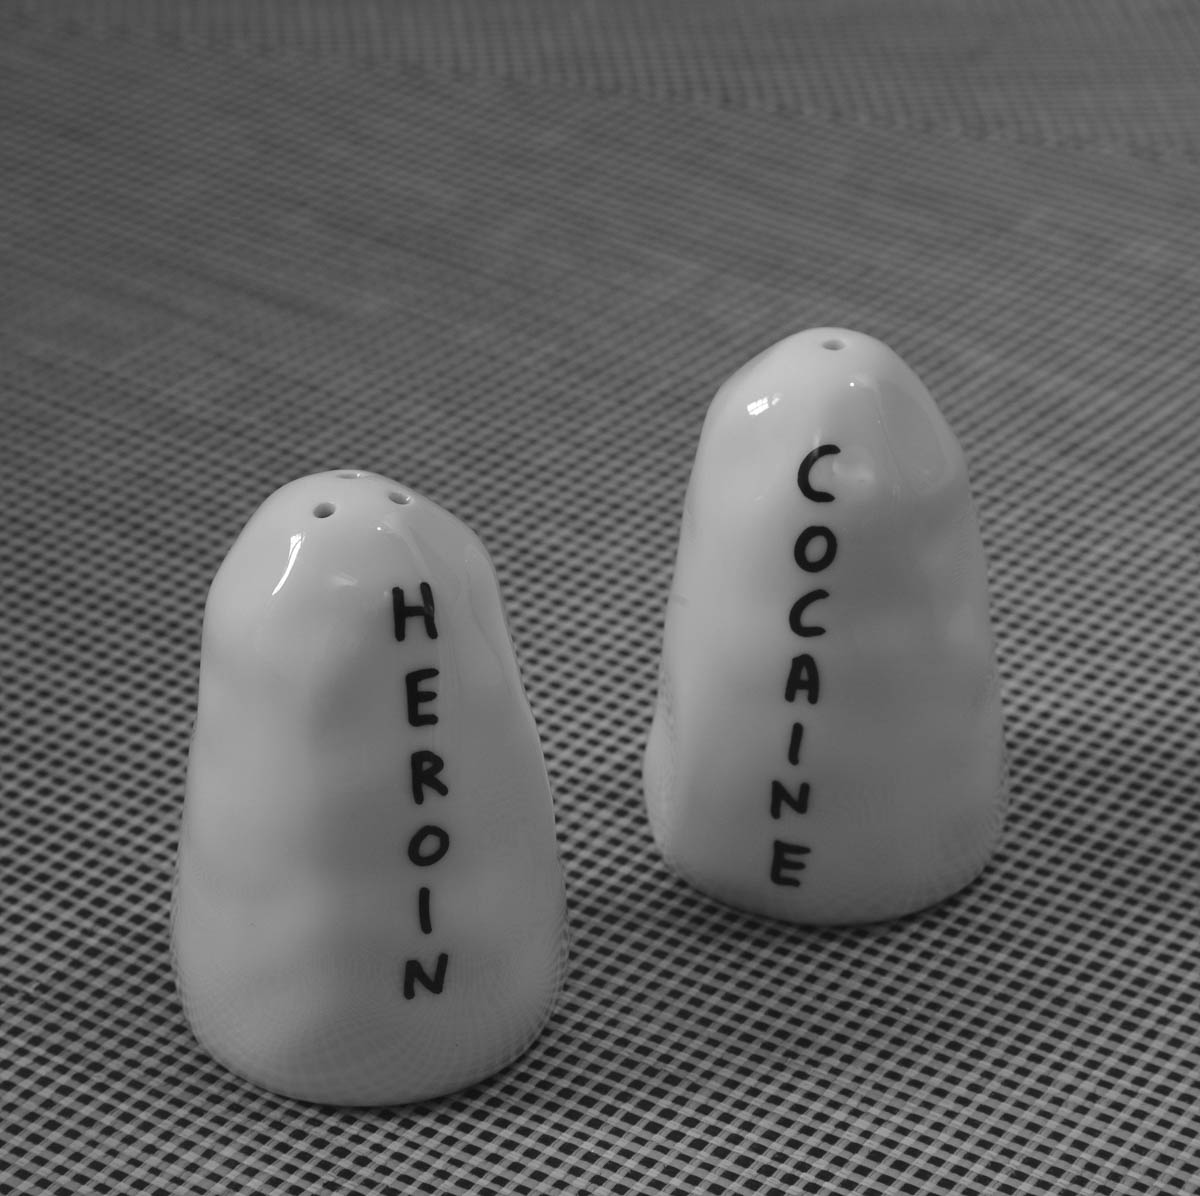 An artwork by David Shrigley consisting of a salt and pepper shaker titled “Heroin/Cocaine,” two thousand.